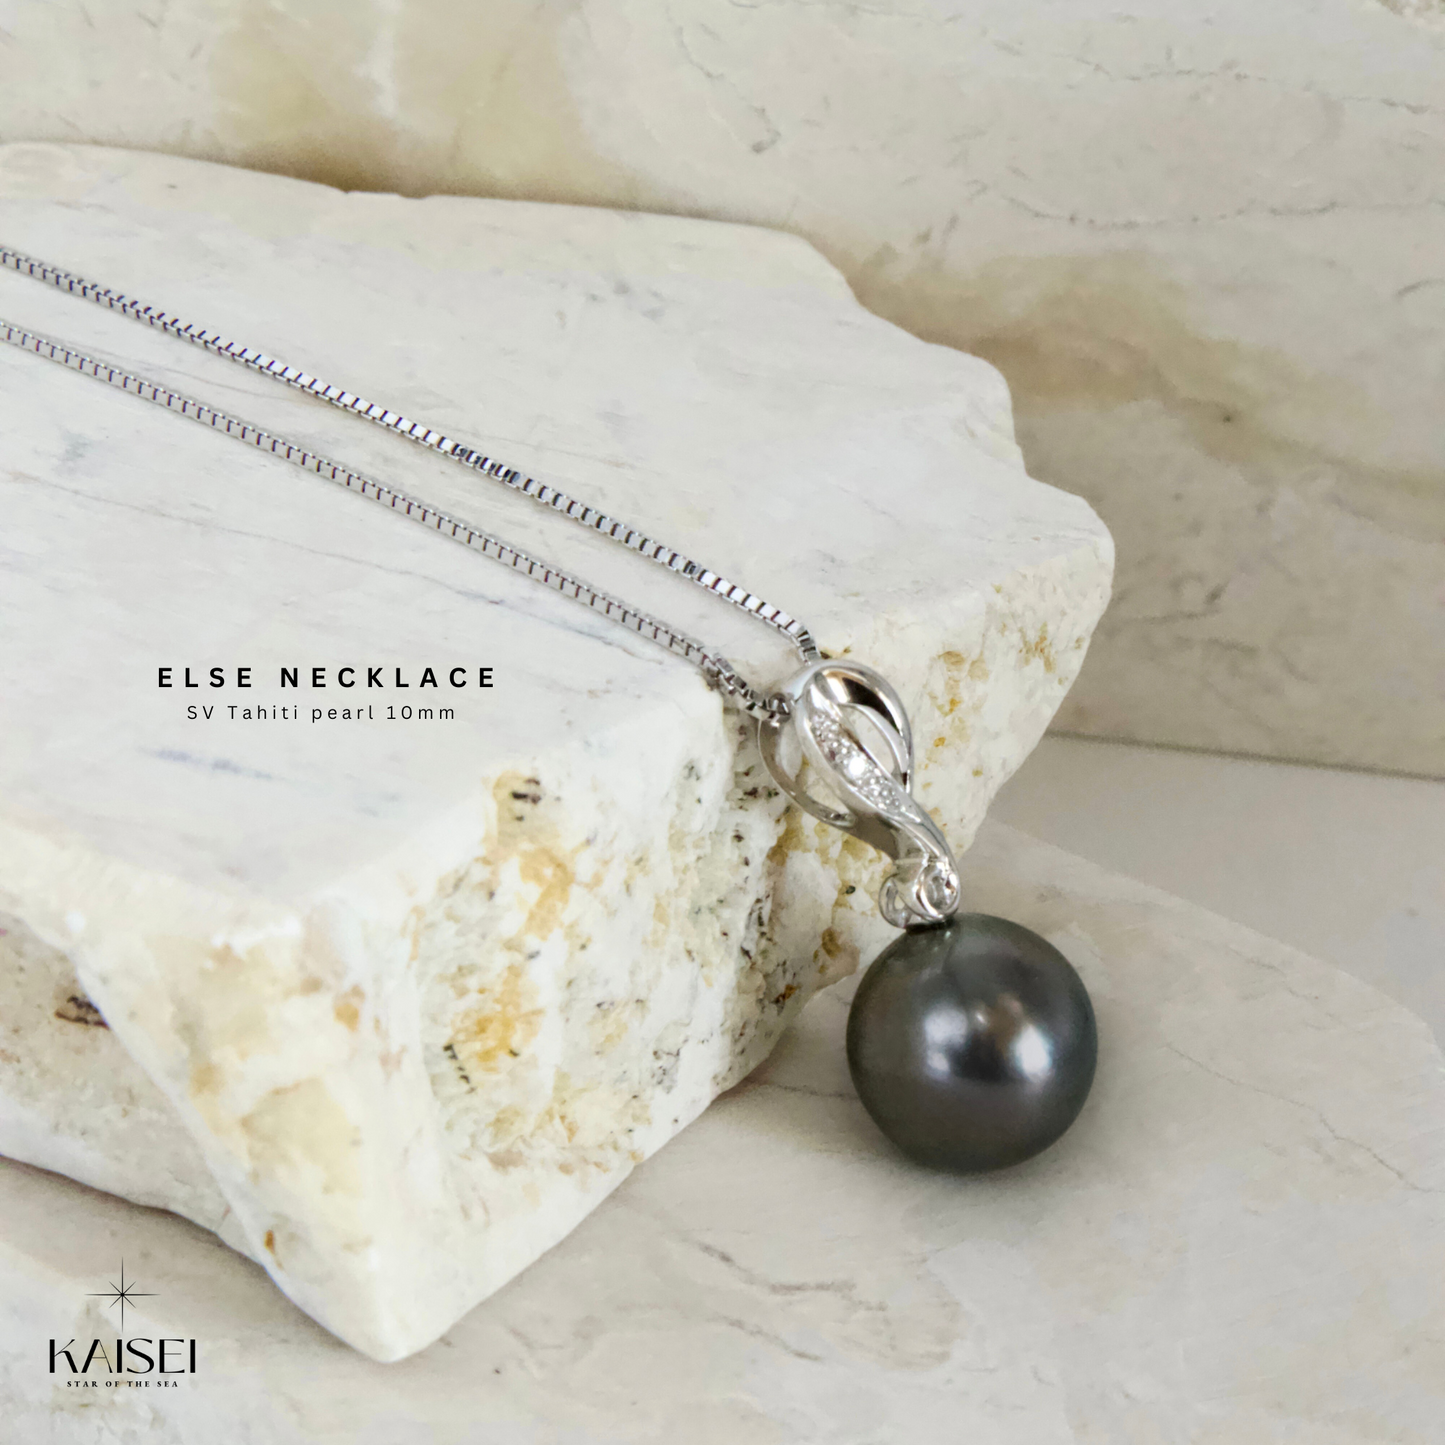 Kaisei Pearl - Else Necklace Tahiti Pearl 10mm Finest Silver Jewelry